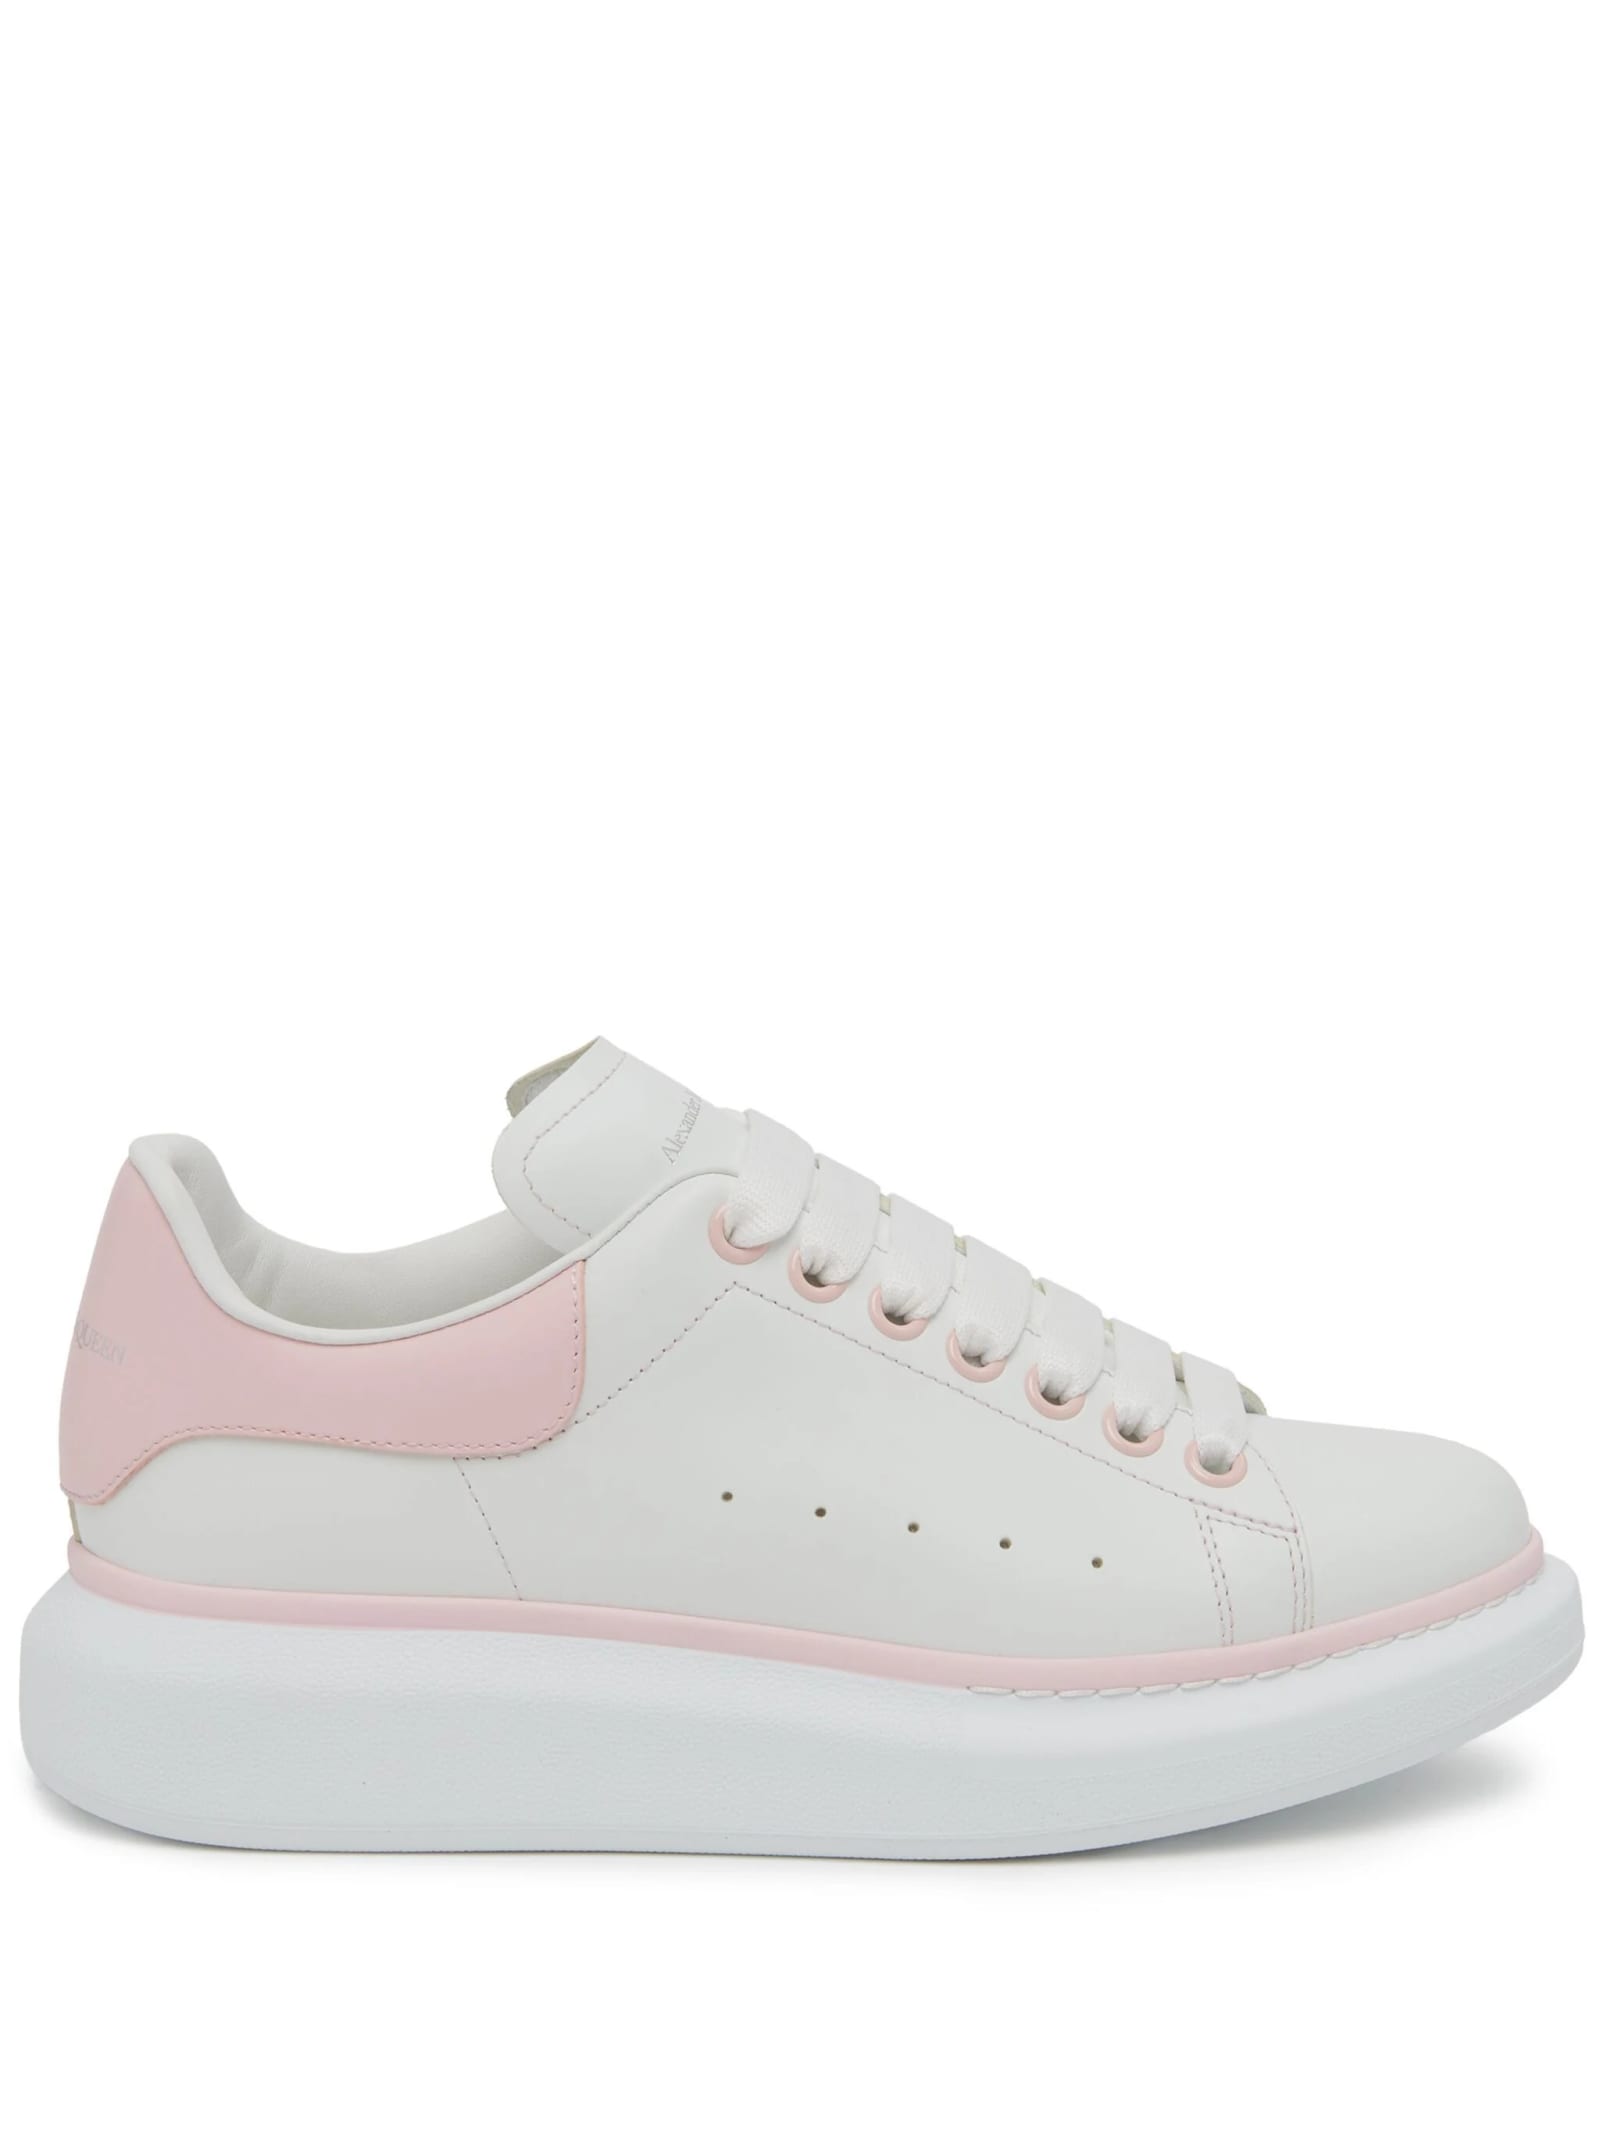 White Oversized Sneakers With Powder Pink Details